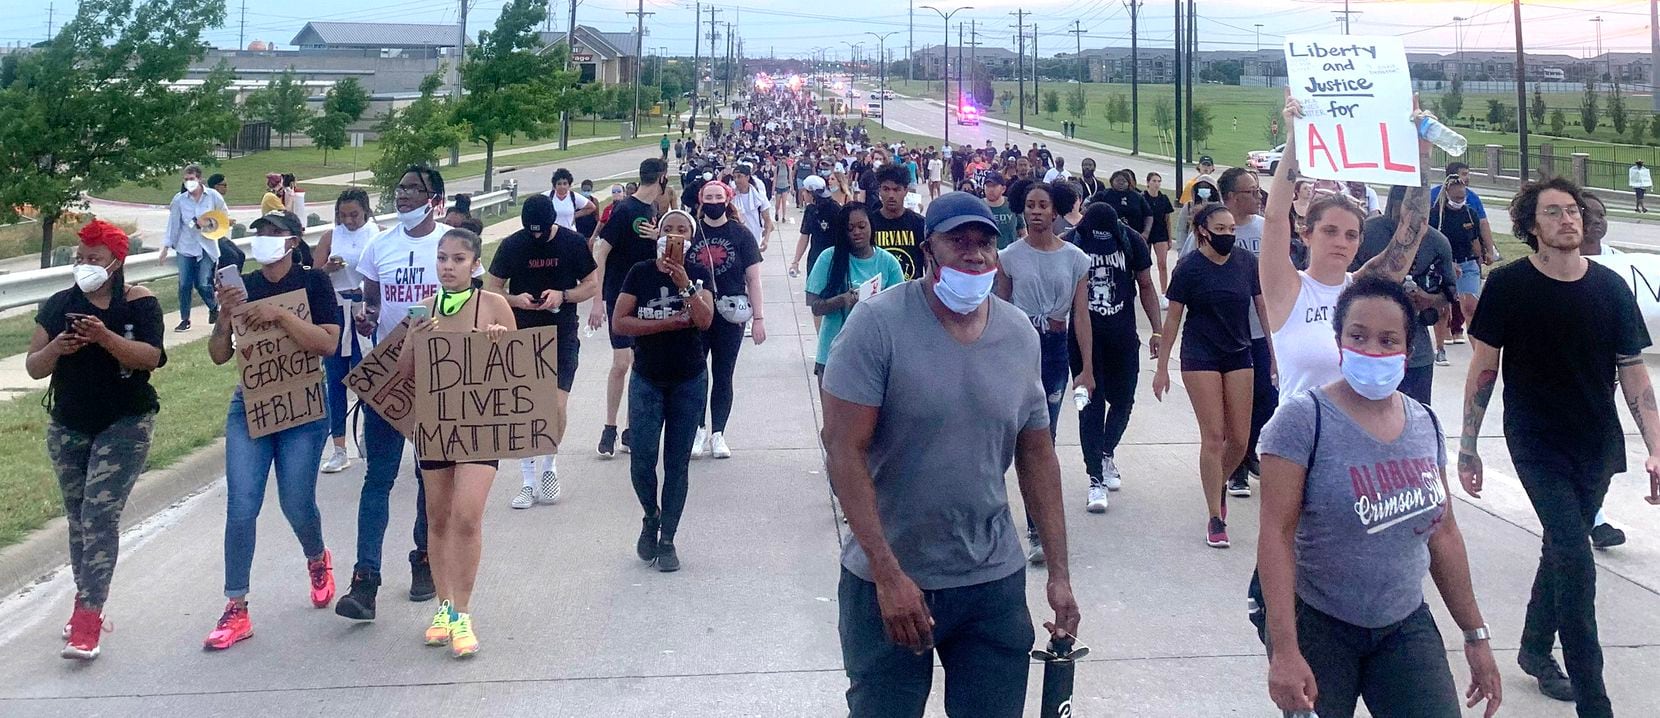 Black Lives Matter protesters march on Eldorado Pwy in Frisco on Monday evening, June 1, 2020.